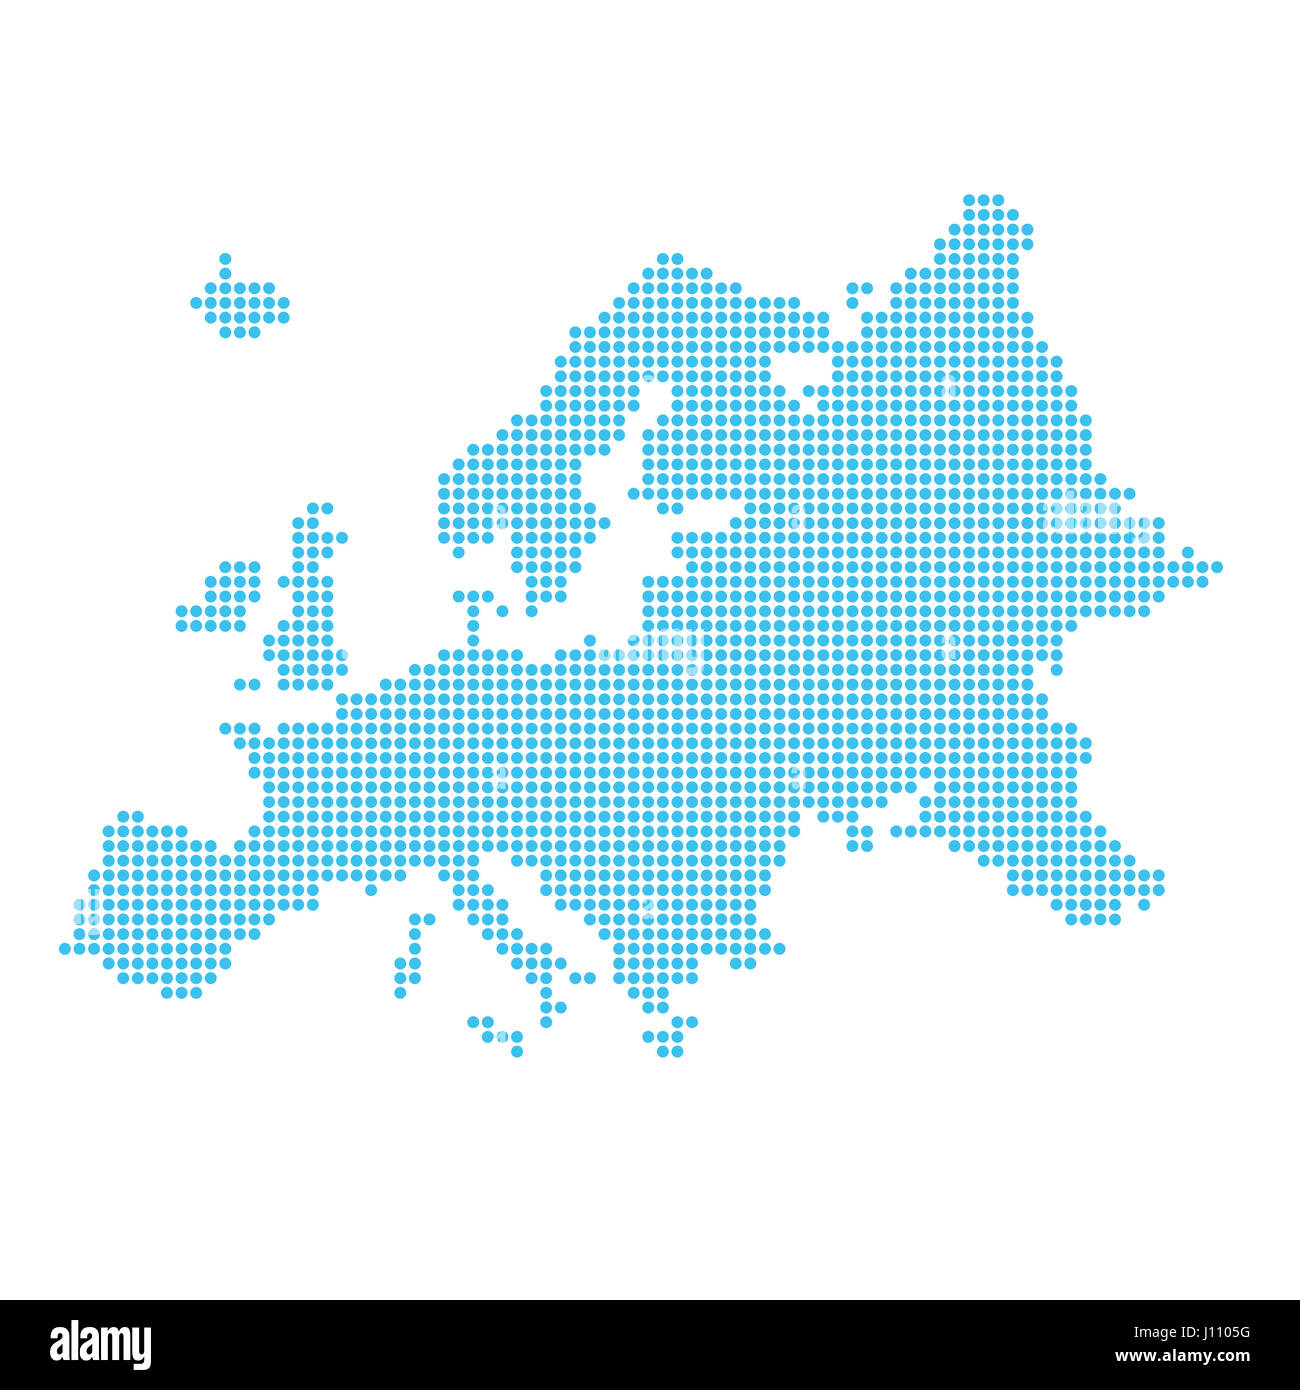 Europe made of dots Stock Photo